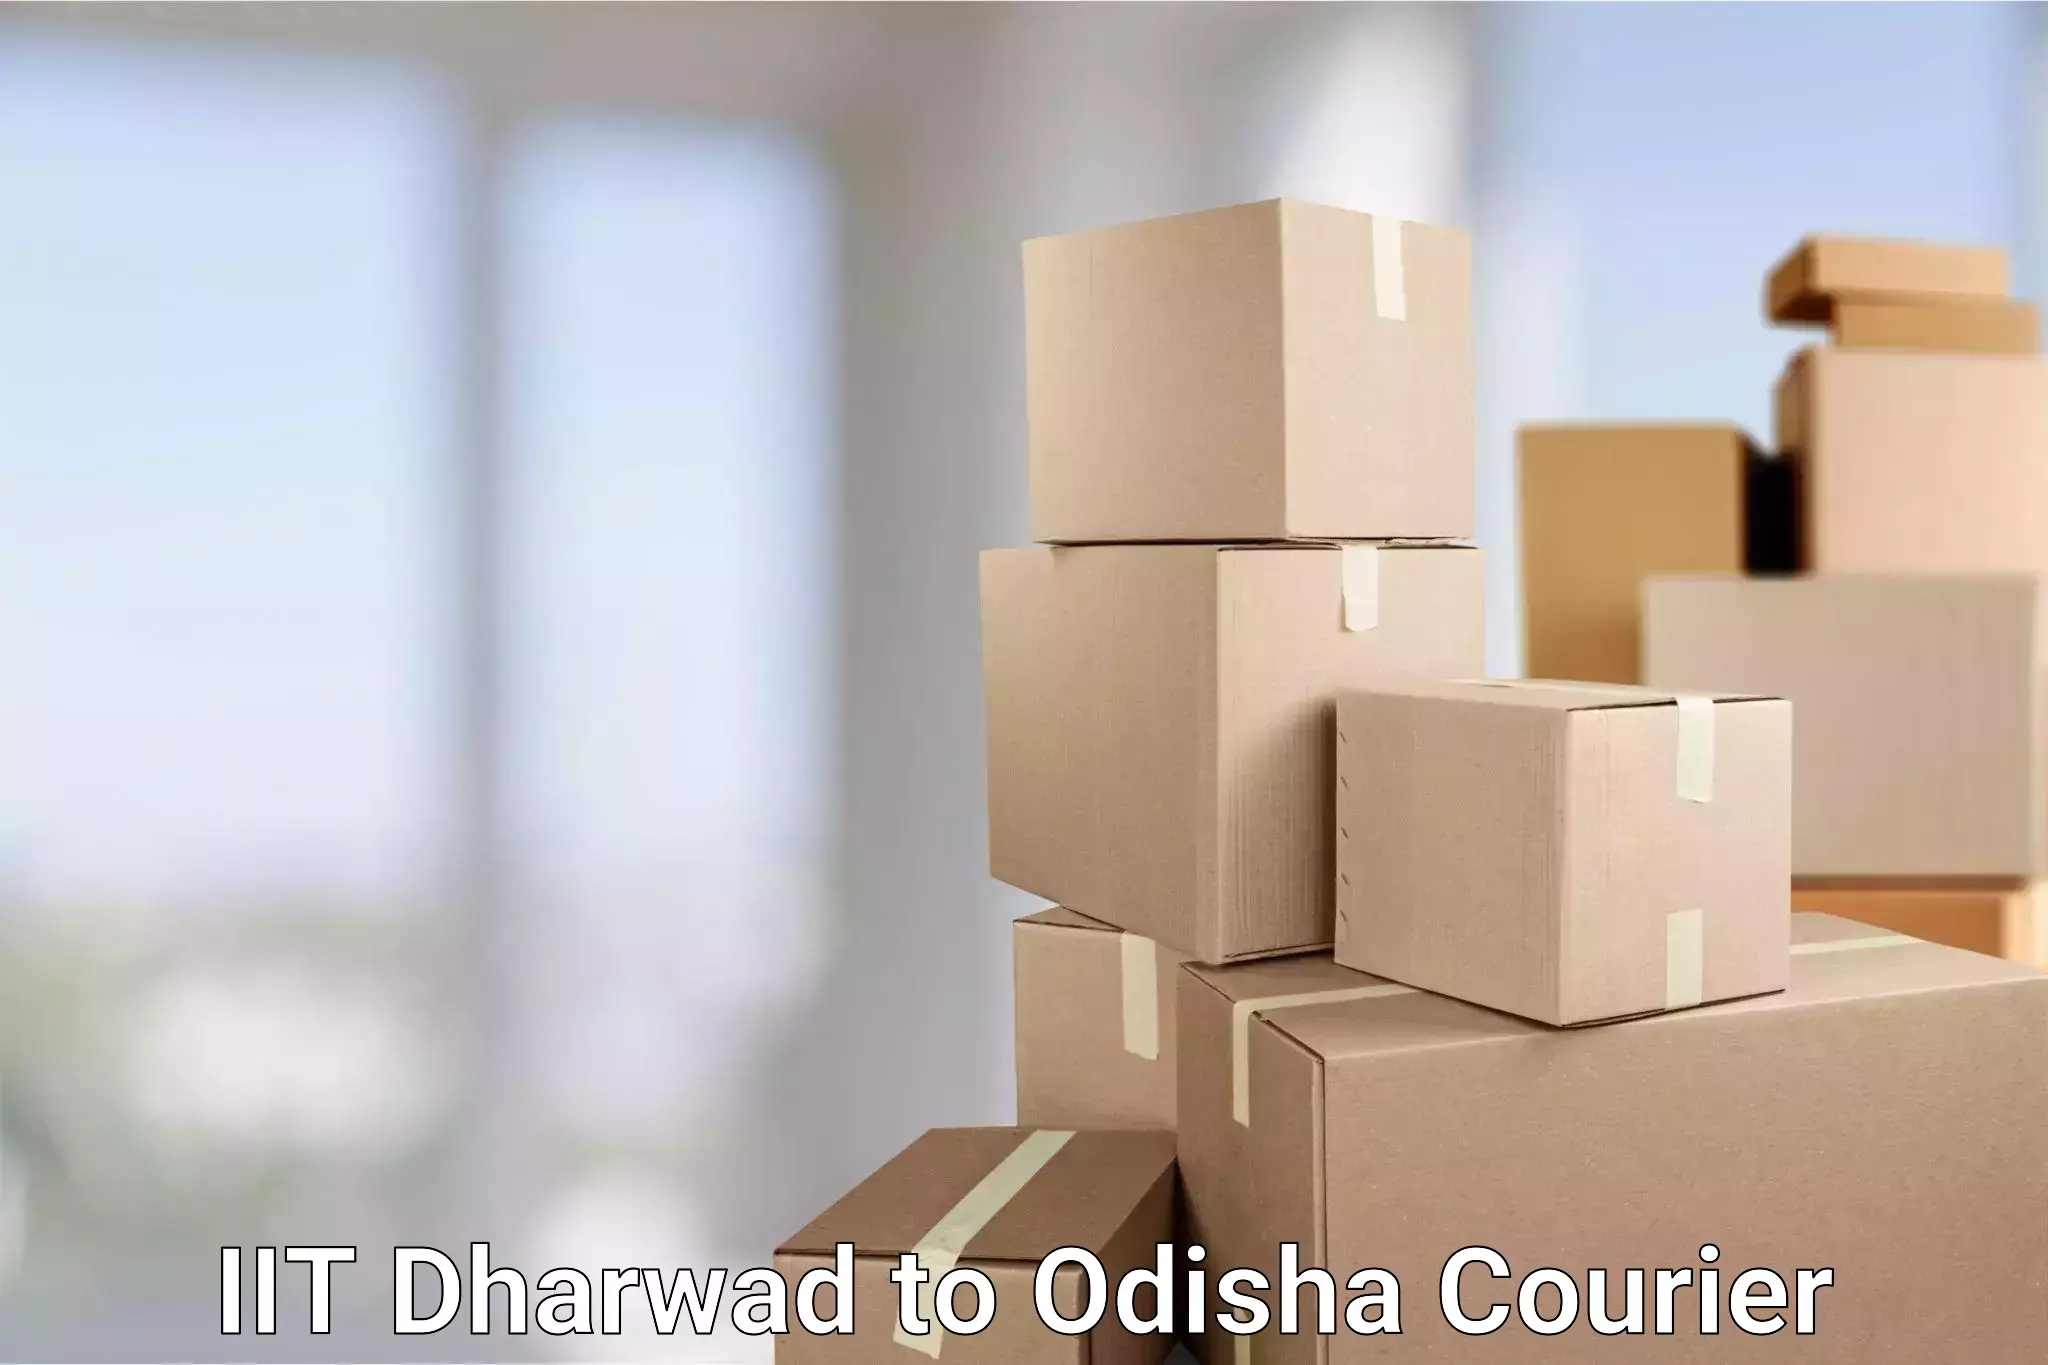 Express package services IIT Dharwad to Odisha